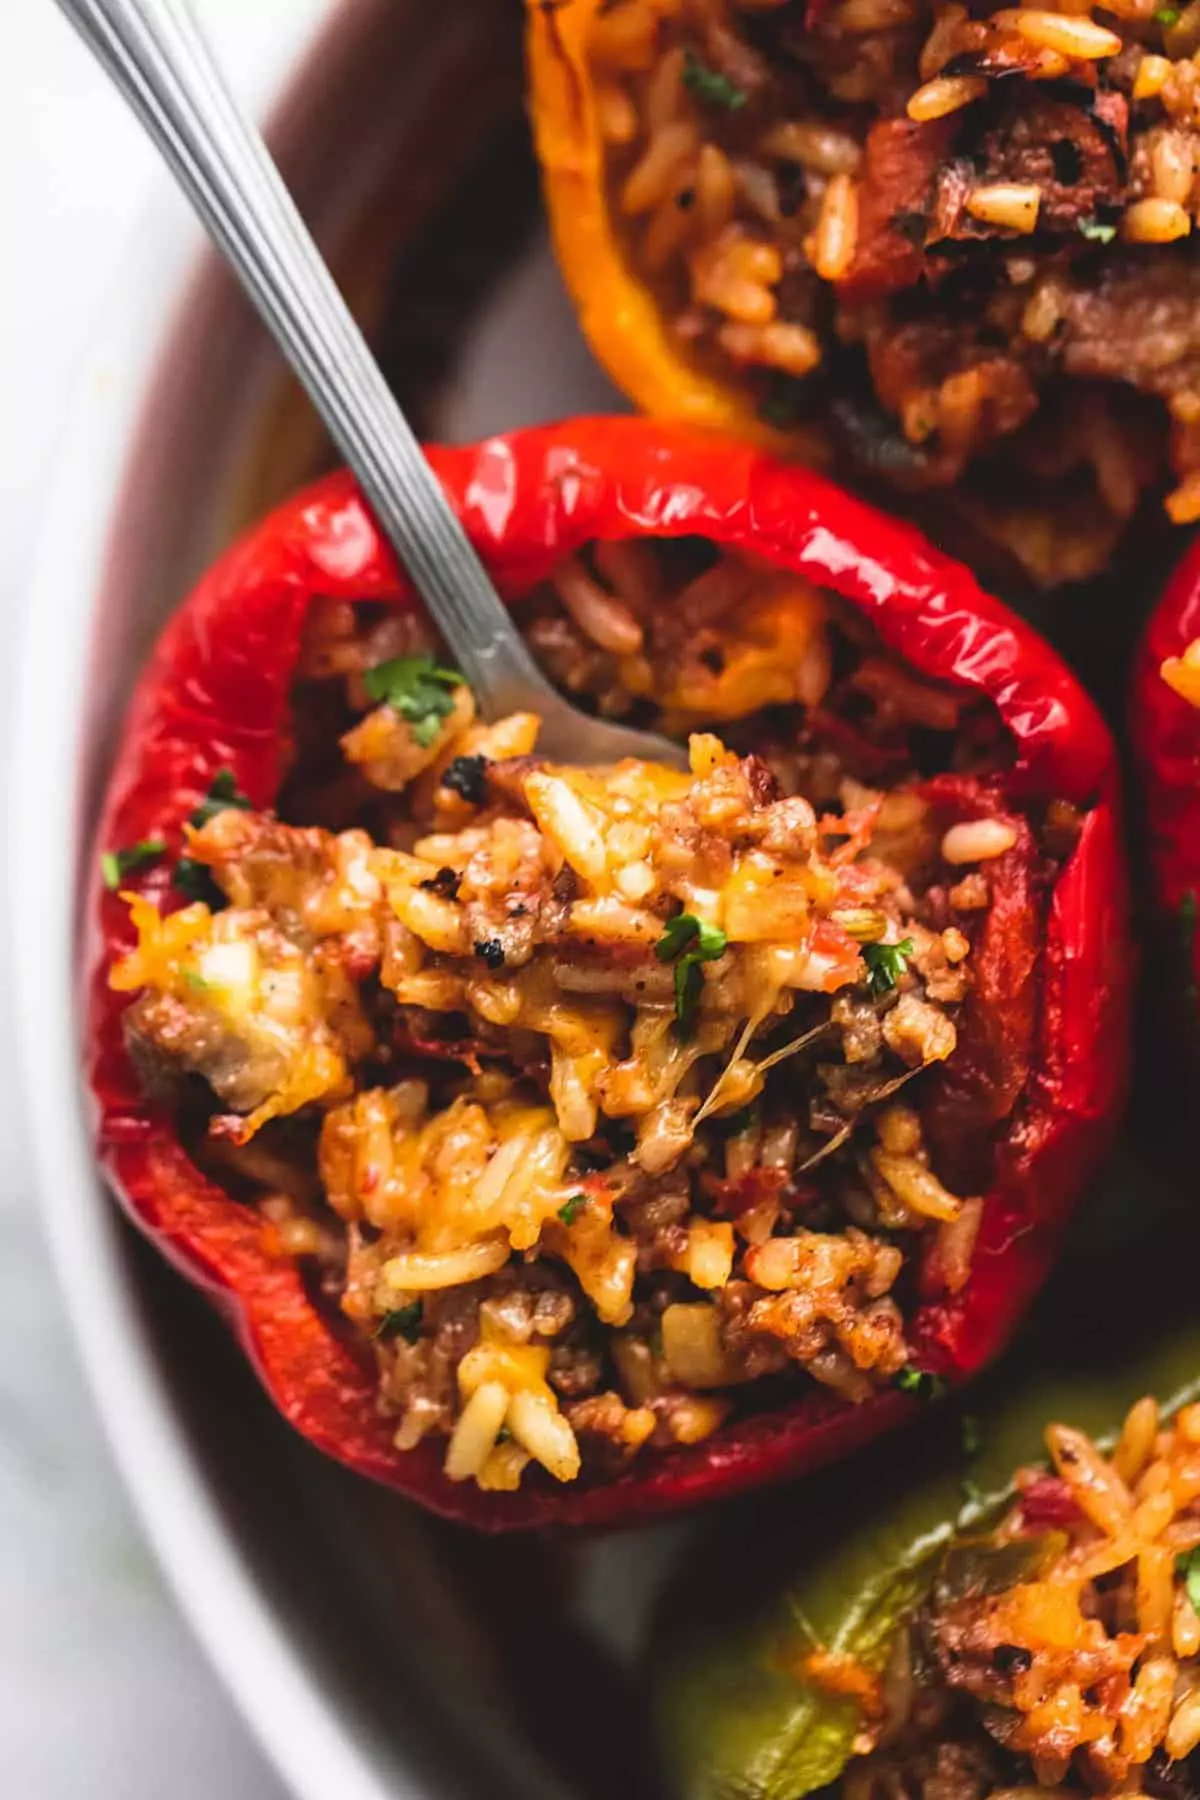 Stuffed peppers with ground sausage